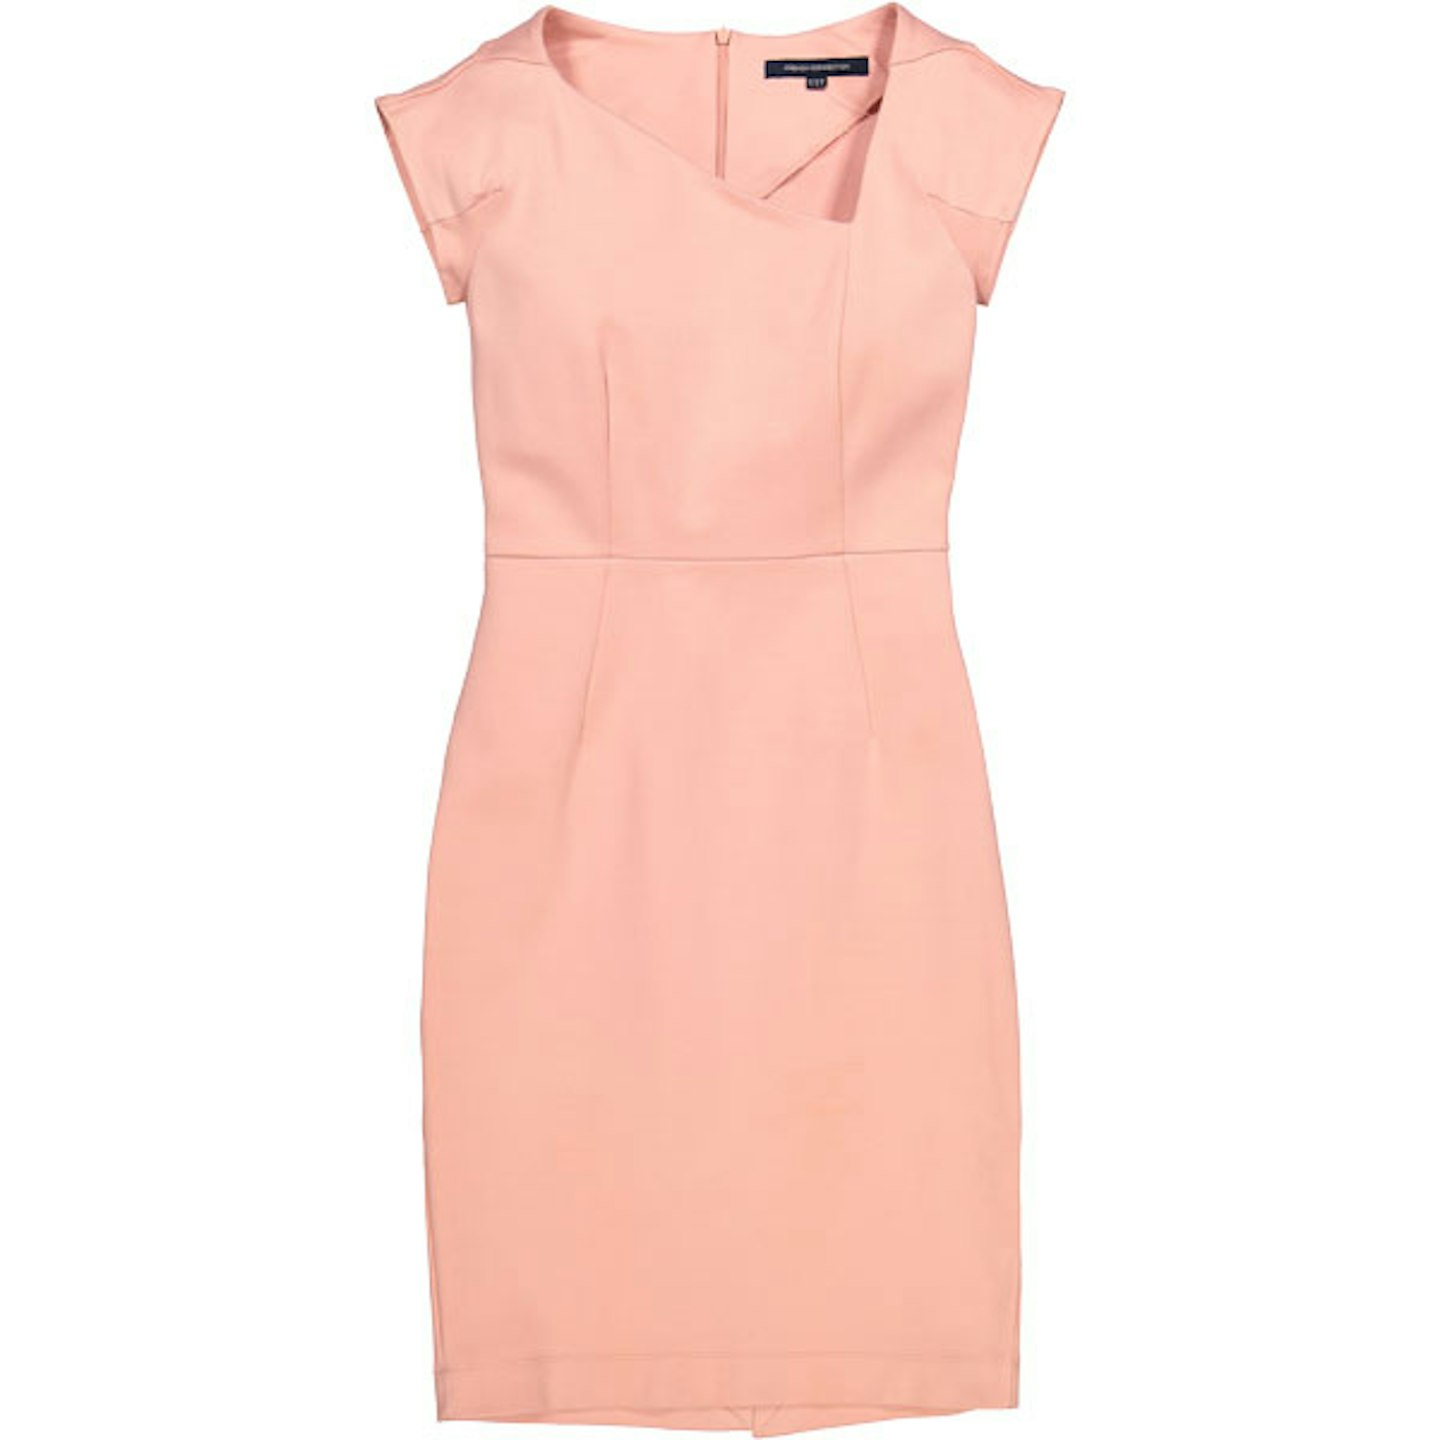 French Connection pink work dress